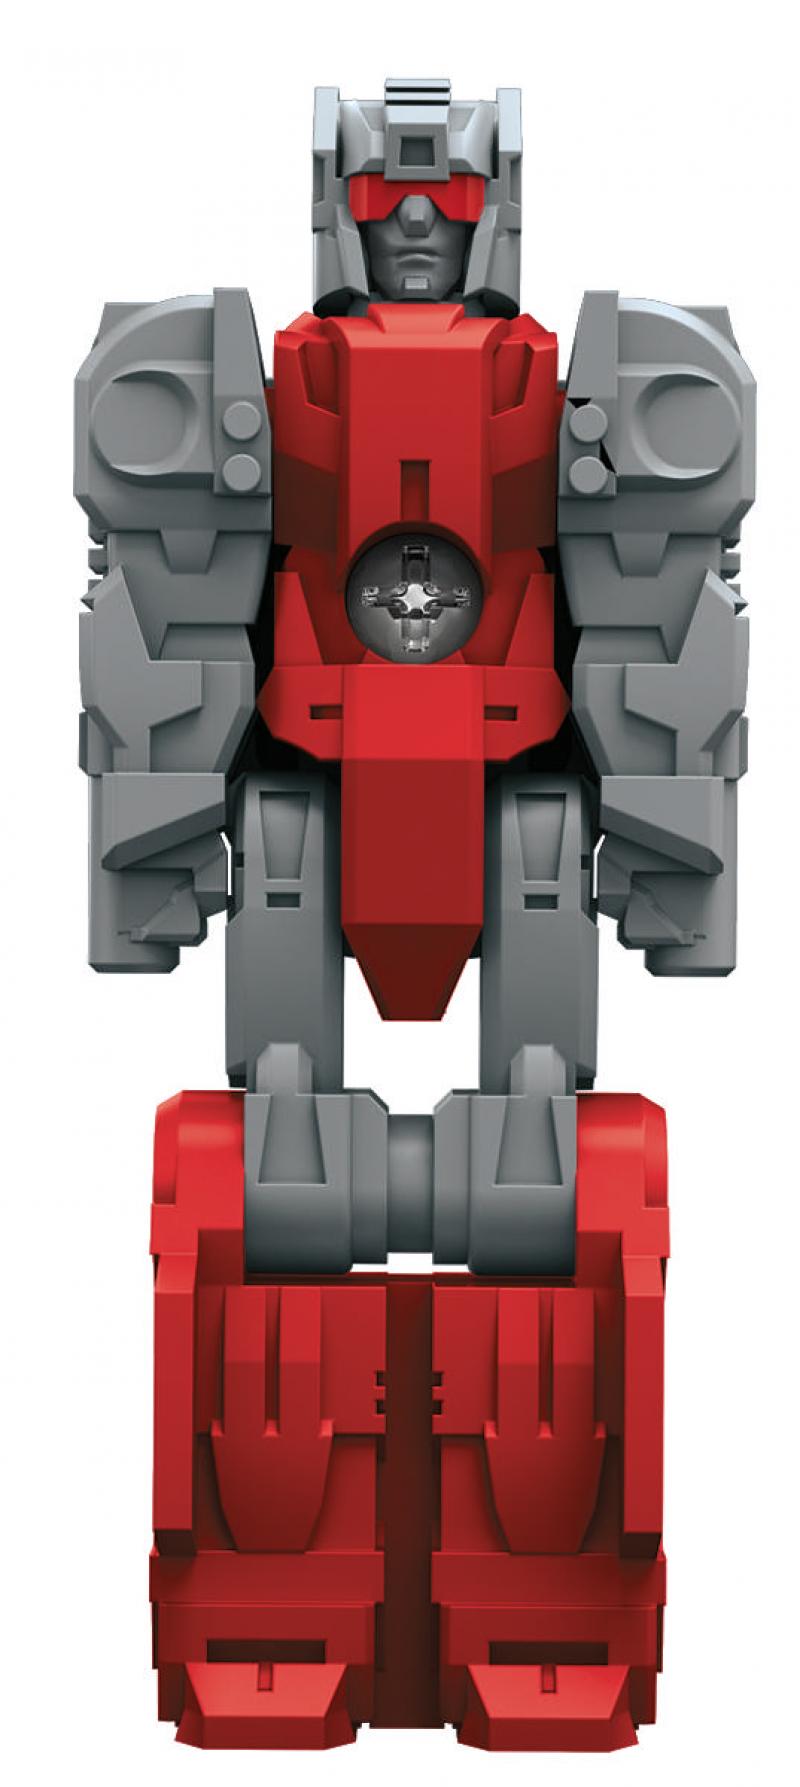 NYCC 2015 - Transformers Titans Return Official Product Images